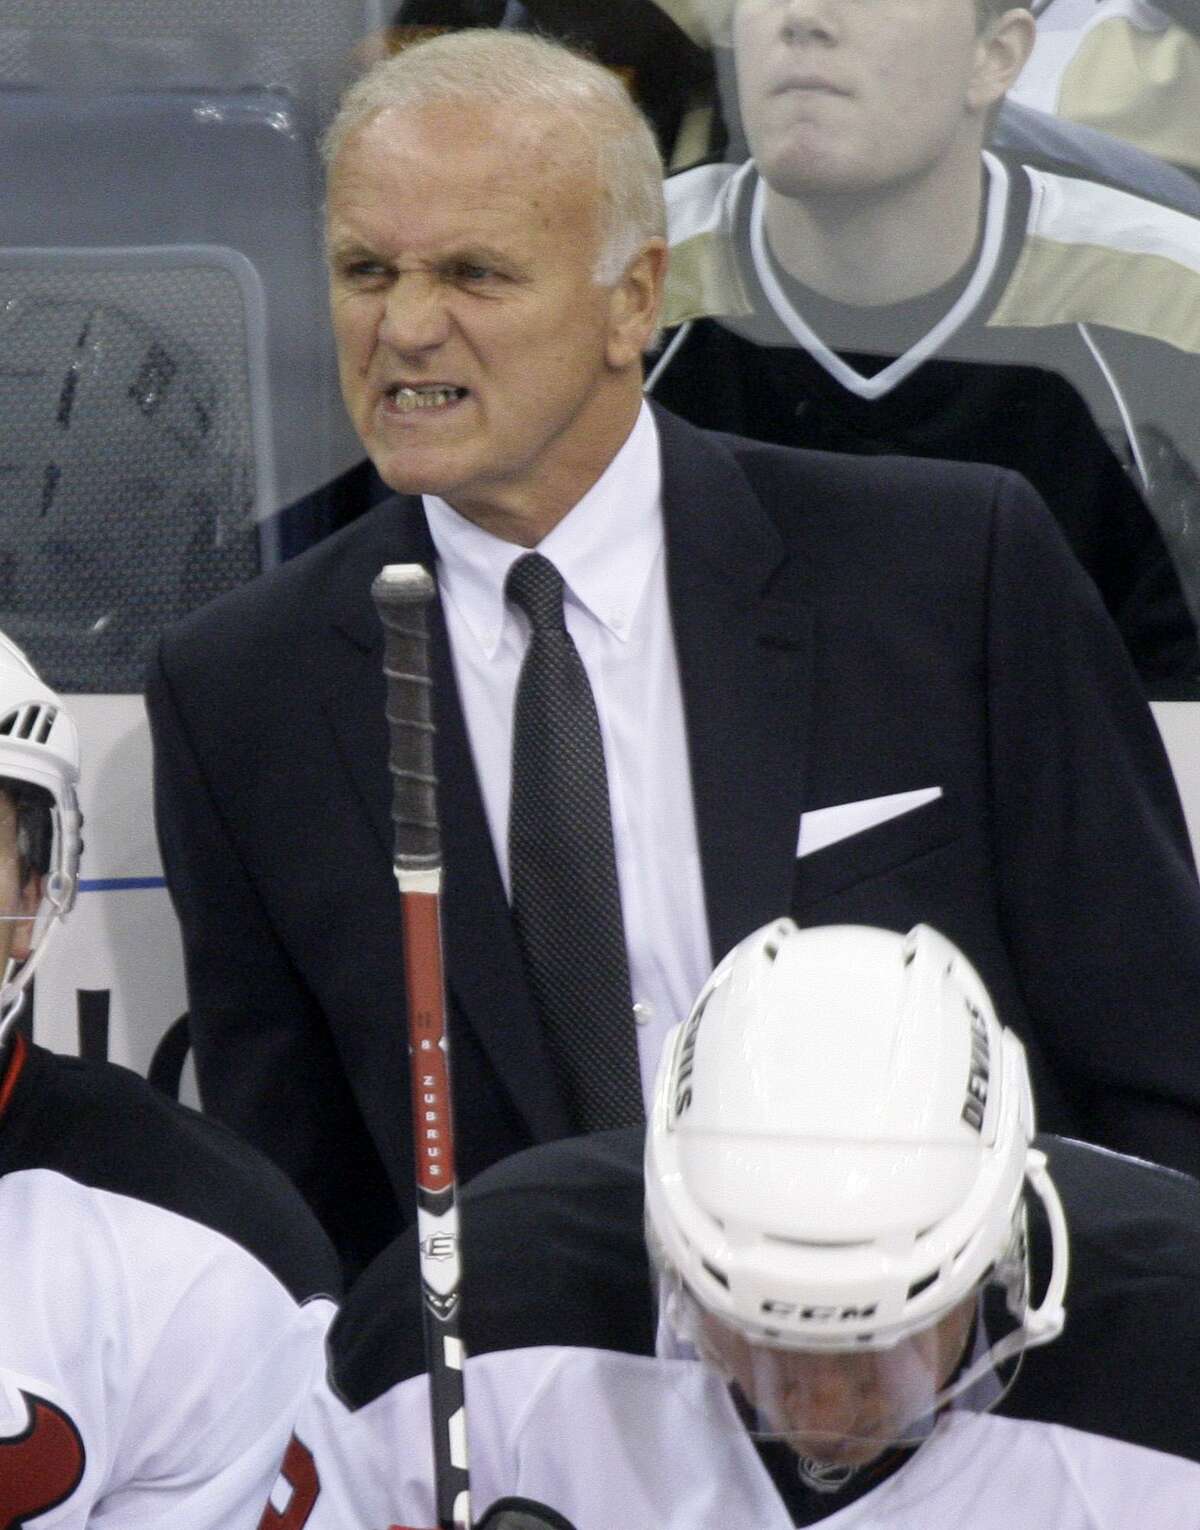 AP Photo/Gene J. Puskar New Jersey Devils coach Jacques Lemaire grimaces behind his bench during the first period of a 4-1 win over the Pittsburgh Penguins. The Devils have fired rookie coach John MacLean and brought back Jacques Lemaire to replace him.